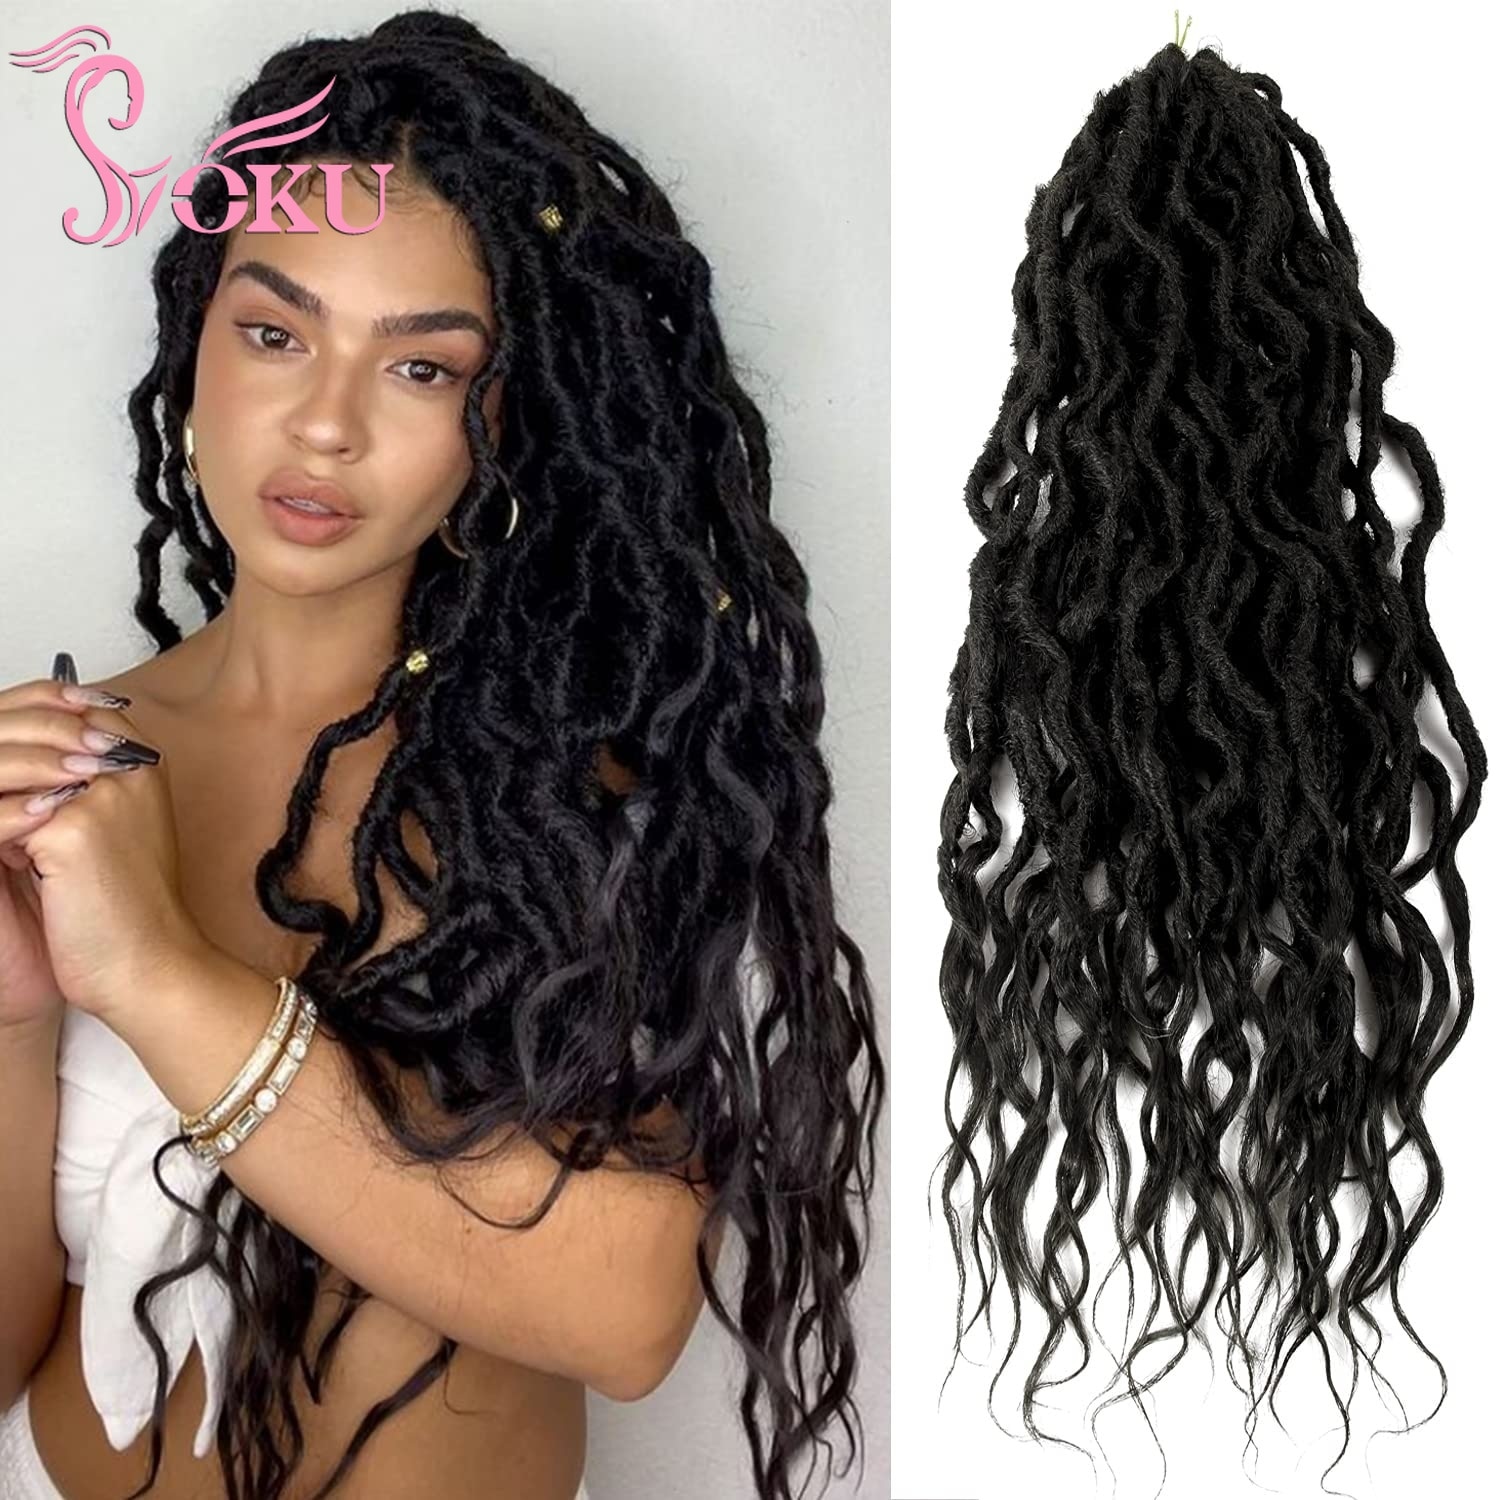 Goddess Locs Ombre Lace Front Braided Wig Faux Locs Curly Crochet